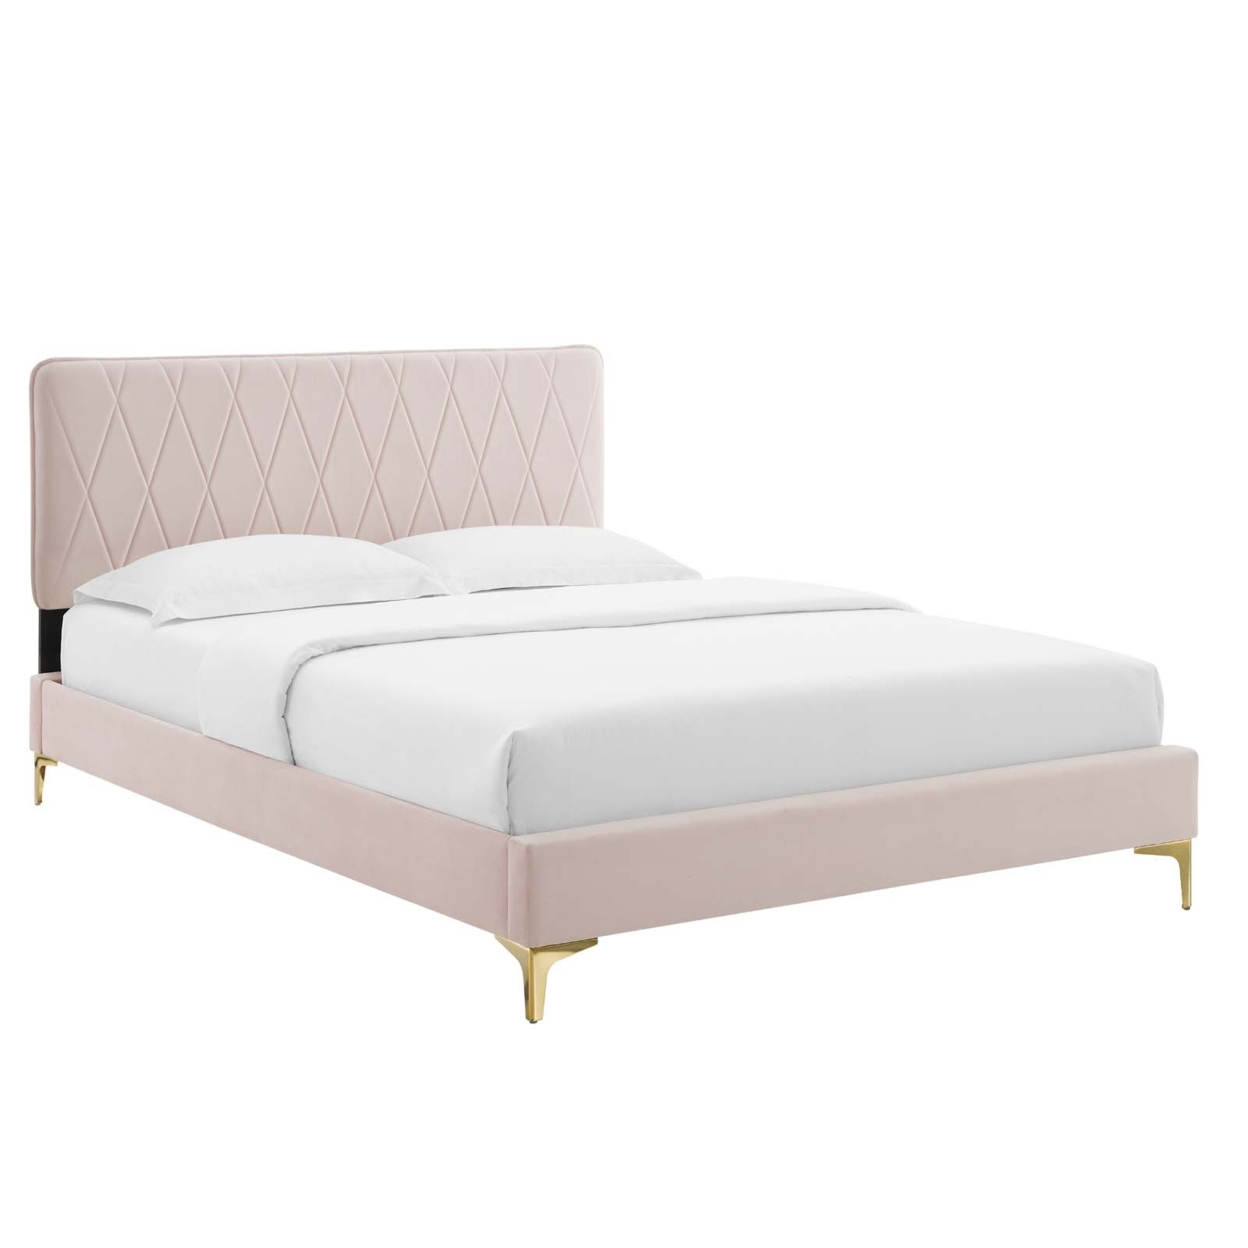 King Bed, Soft Pink Velvet, Diamond Stiched Panel Headboard